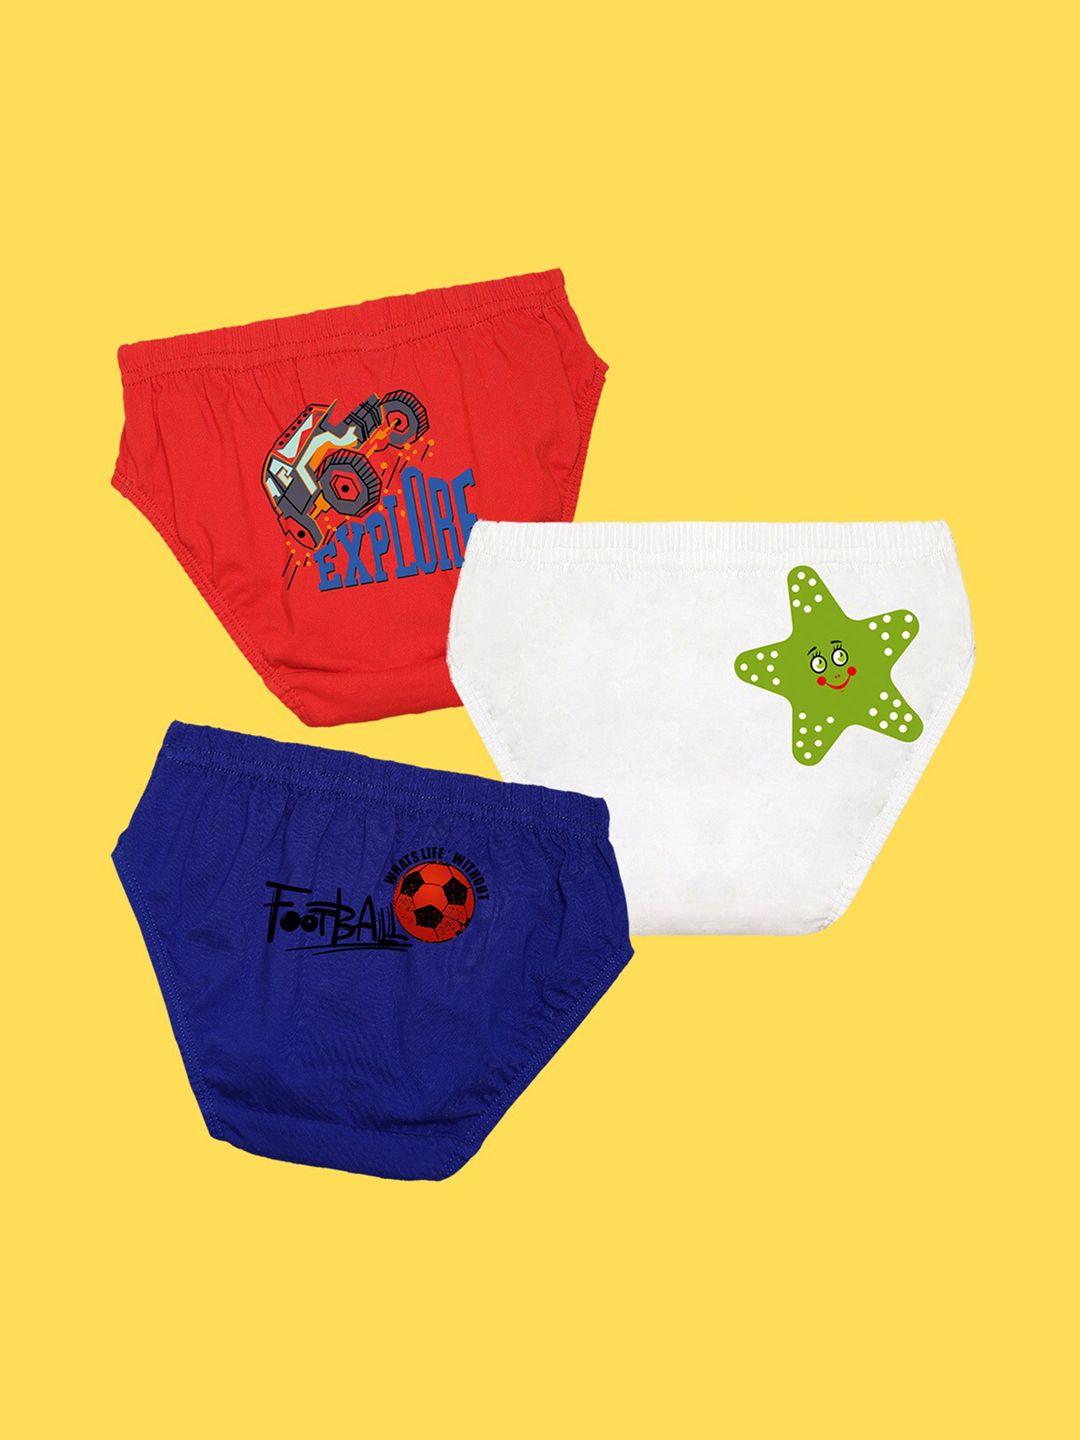 nusyl boys pack of 3 red,white,blue printed briefs